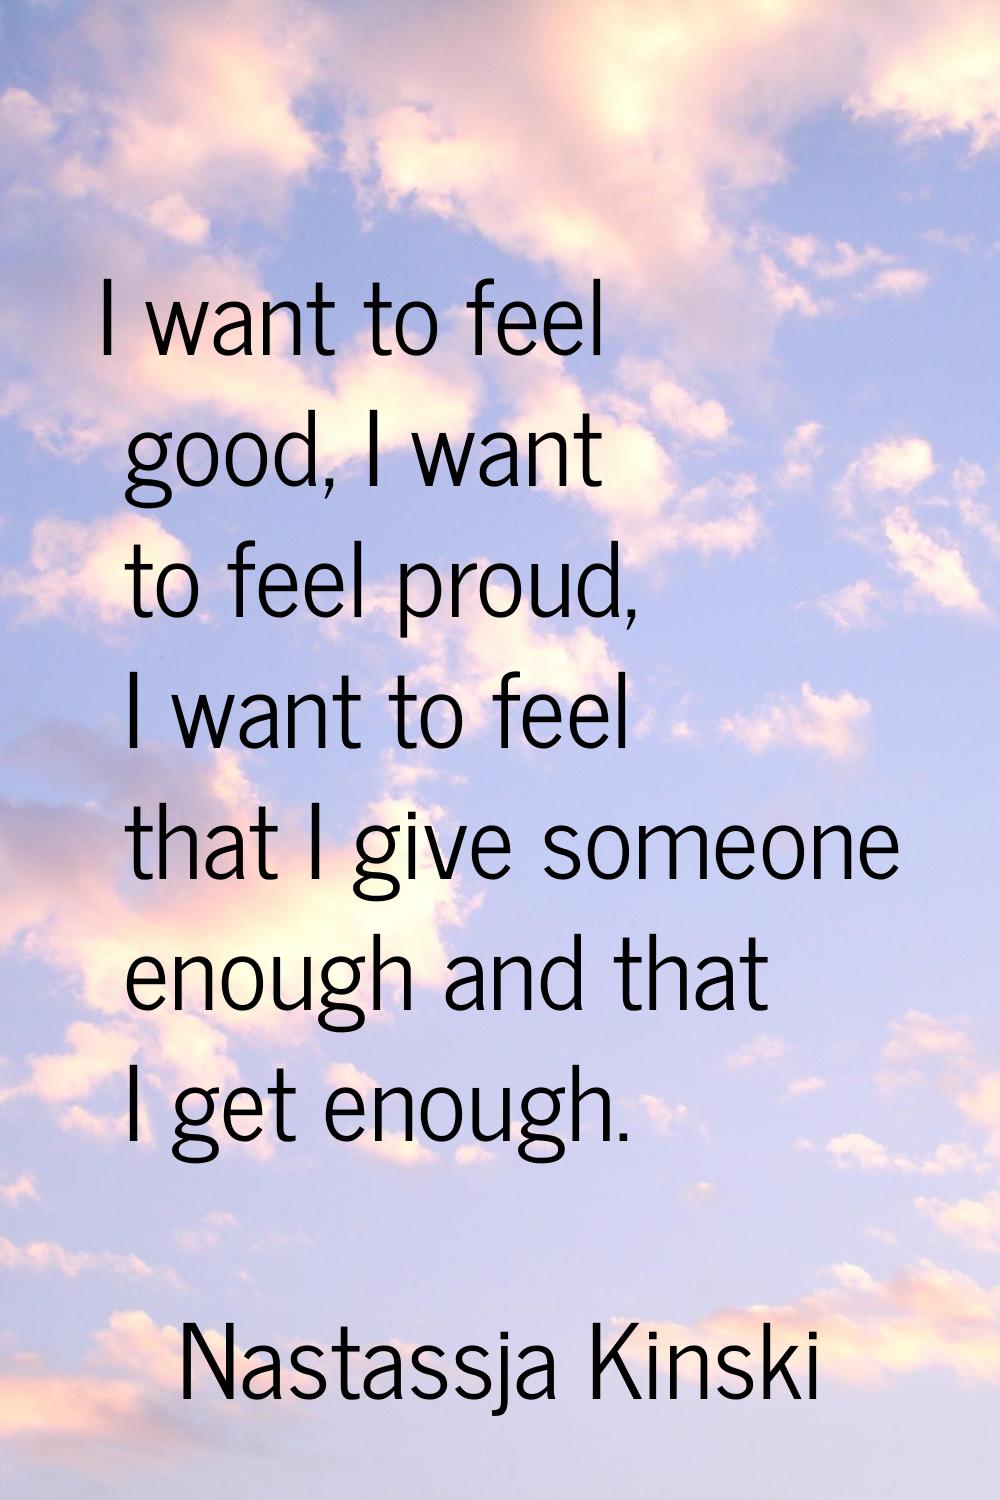 I want to feel good, I want to feel proud, I want to feel that I give someone enough and that I get